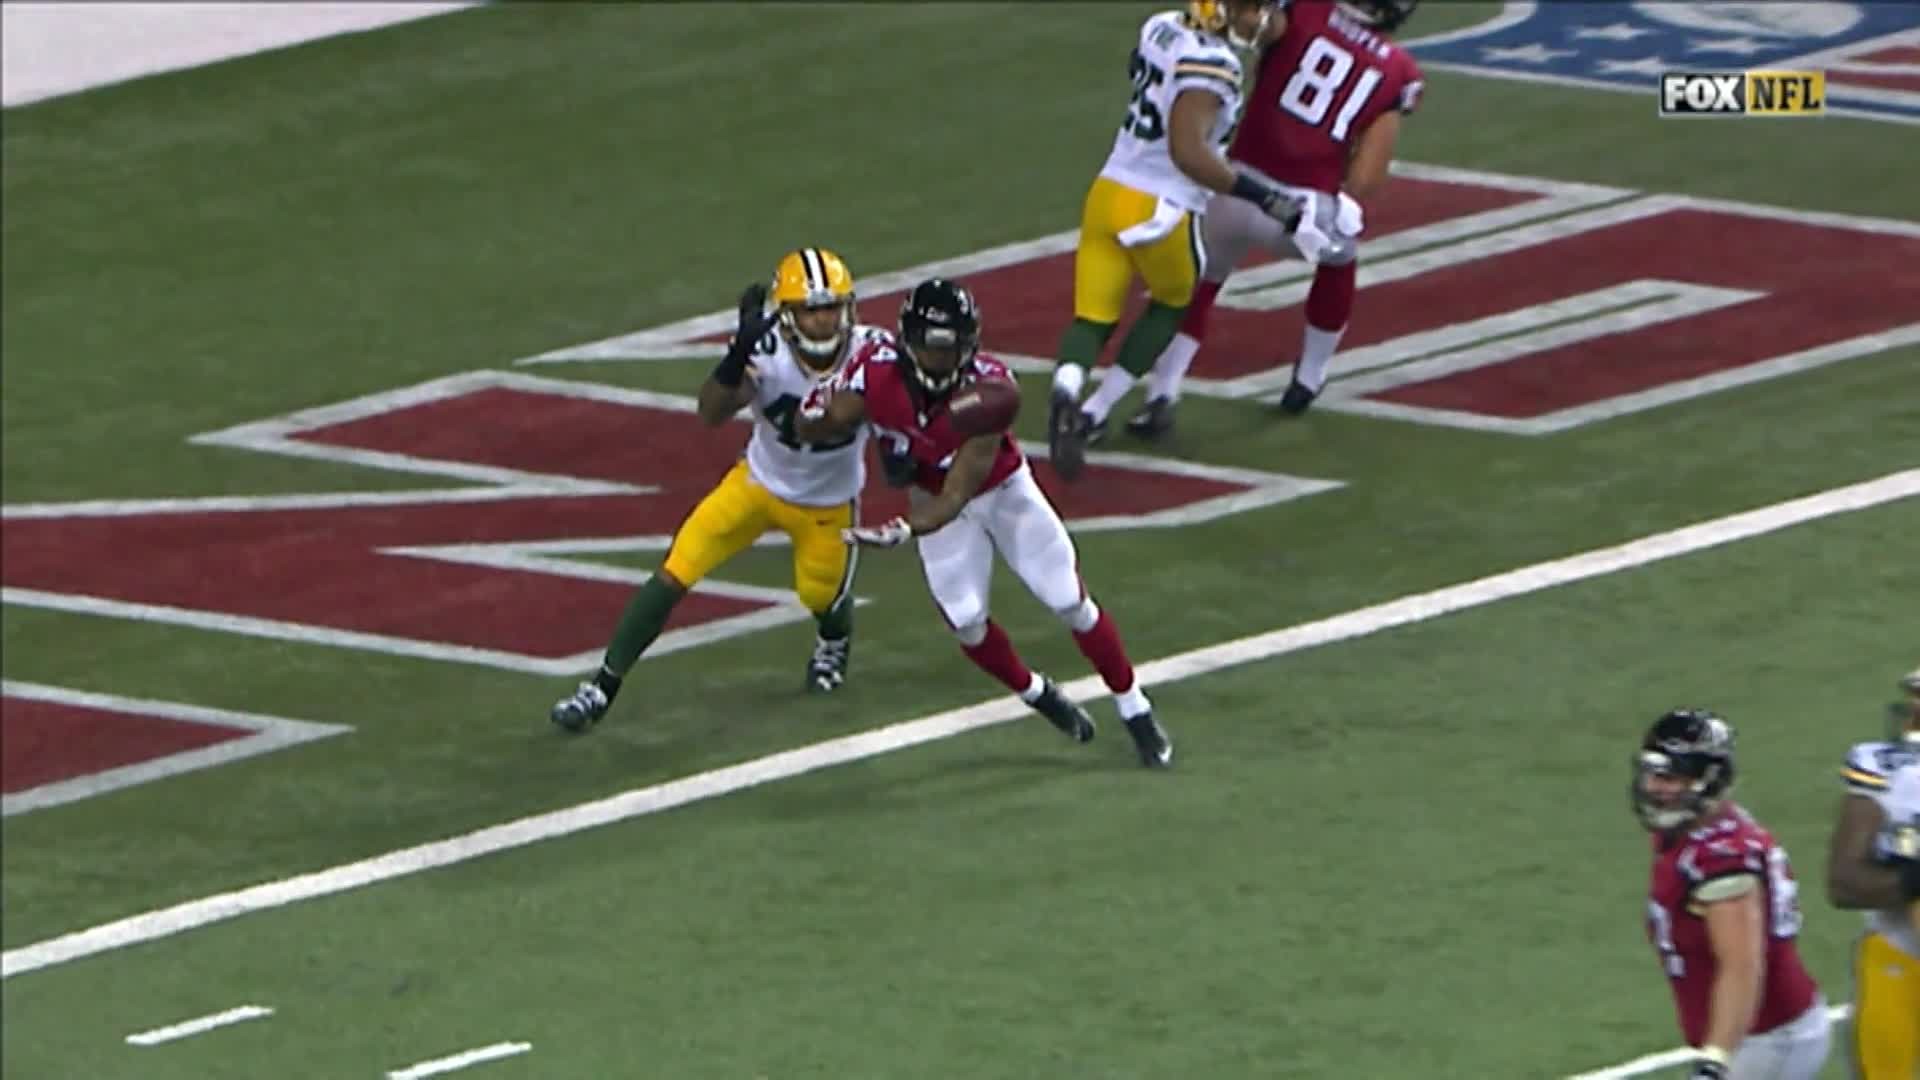 1920x1080 Highlights of the NFC Conference Championship game between the Atlanta  Falcons and the Green Bay Packers